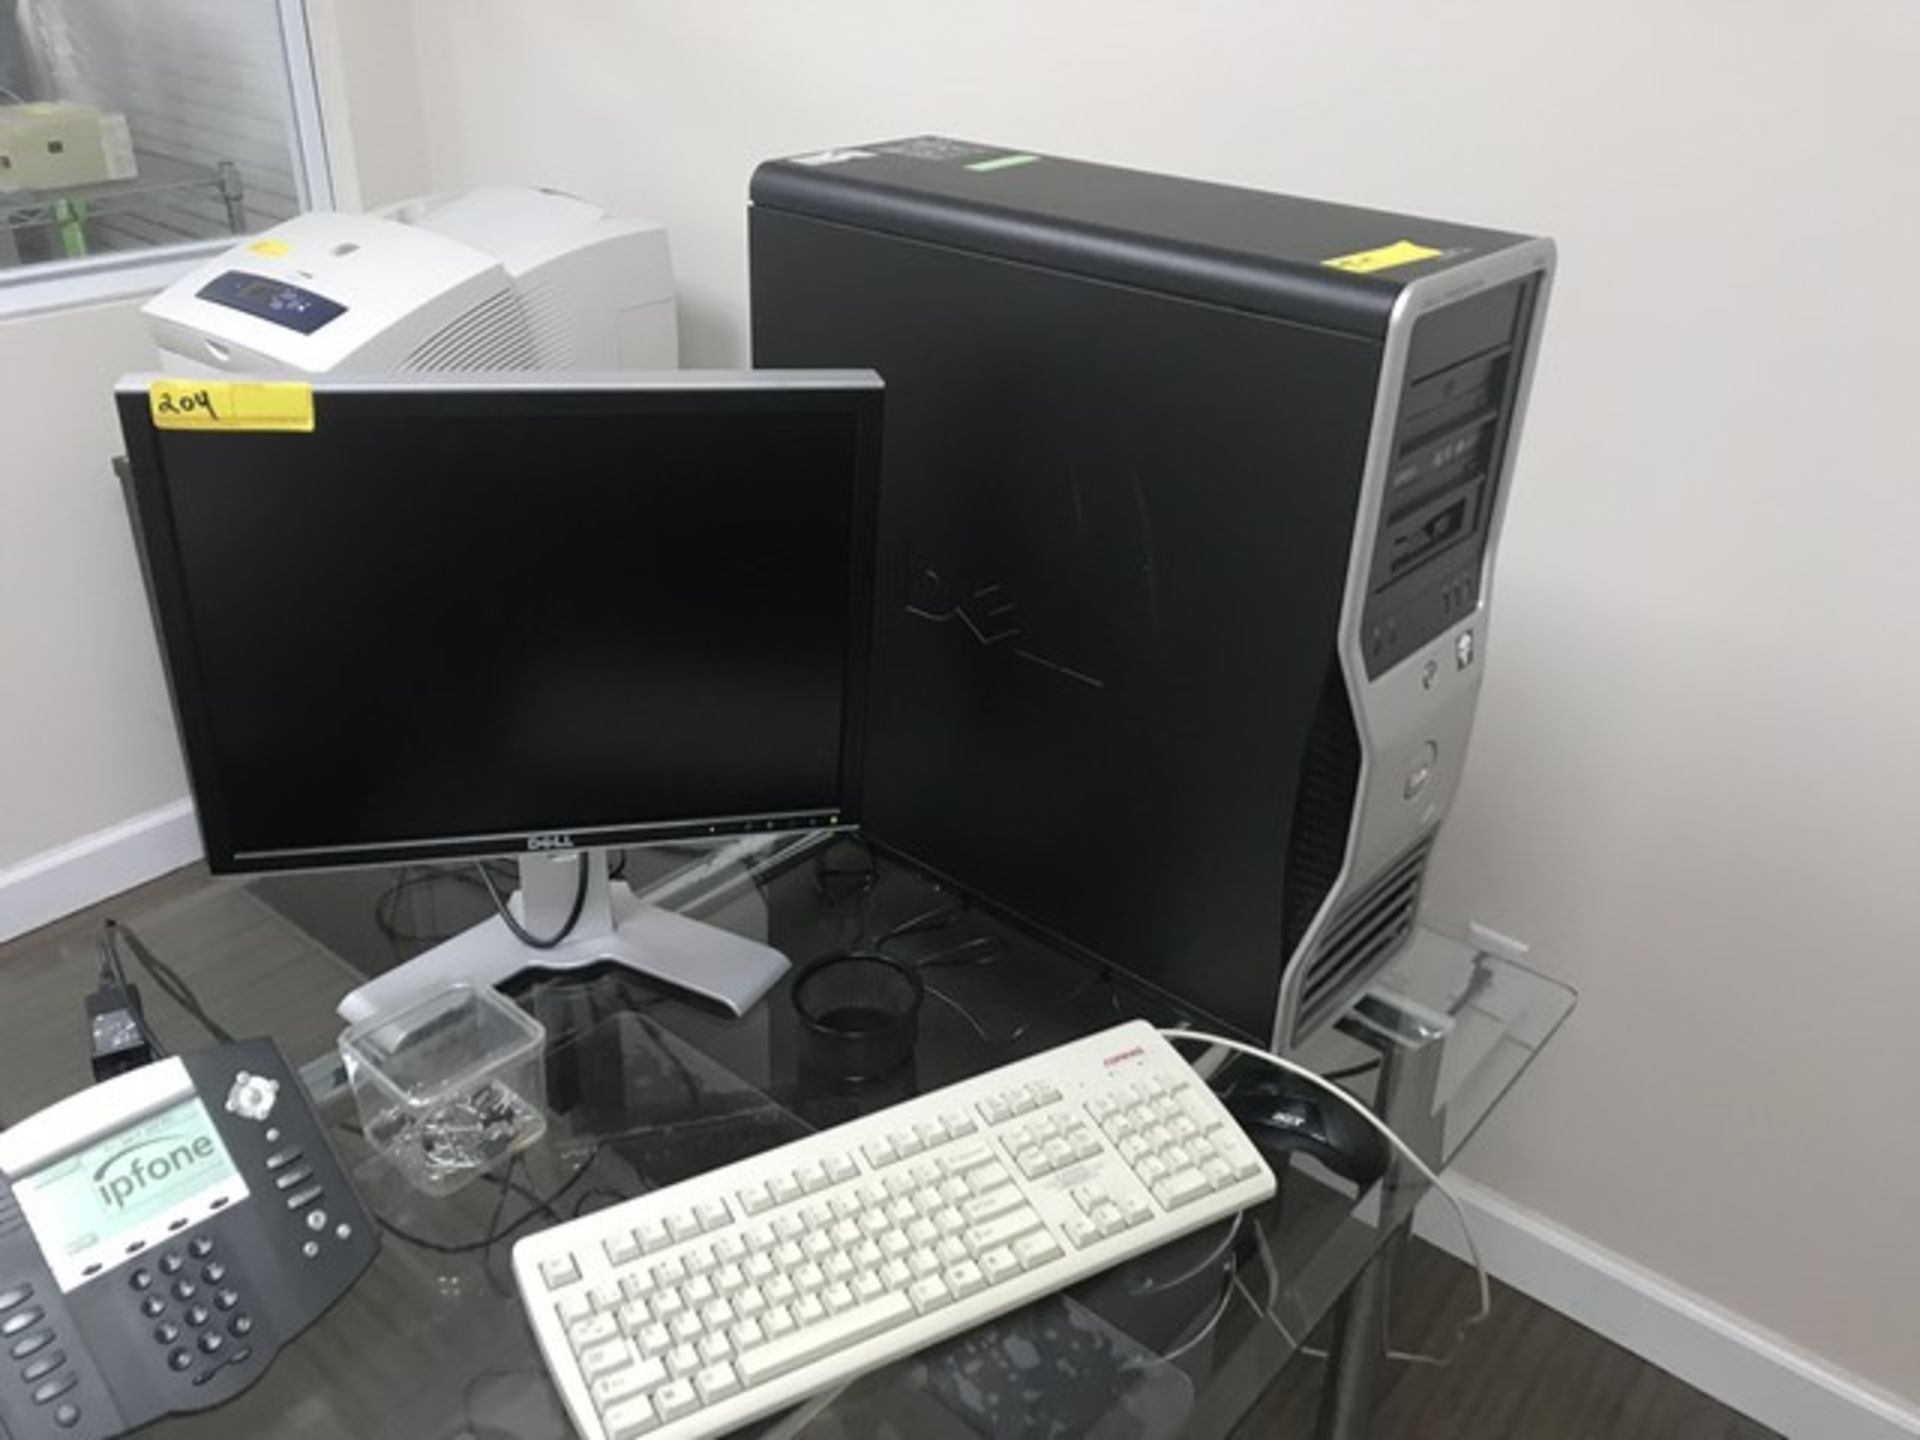 DELL PRECISION 690 COMPUTER SYSTEM WITH MONITOR